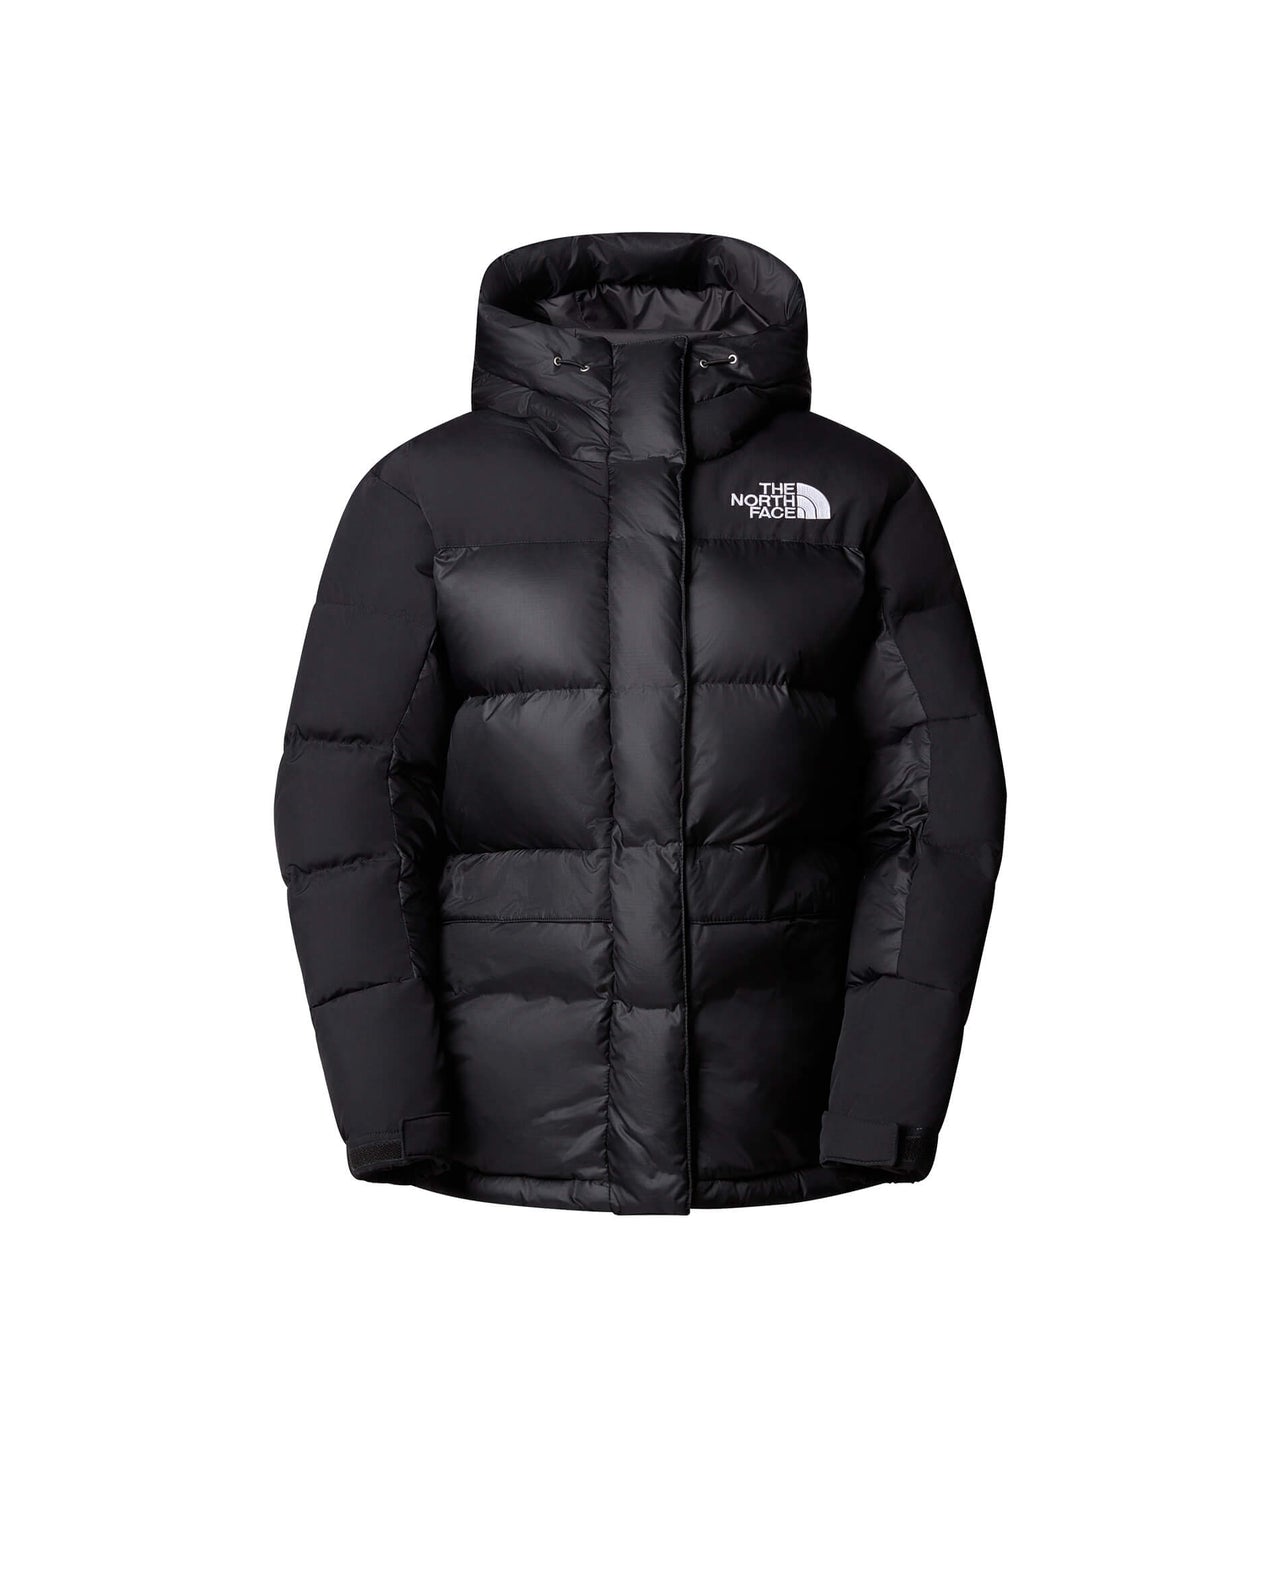 The North Face Women's Himalayan Down Parka